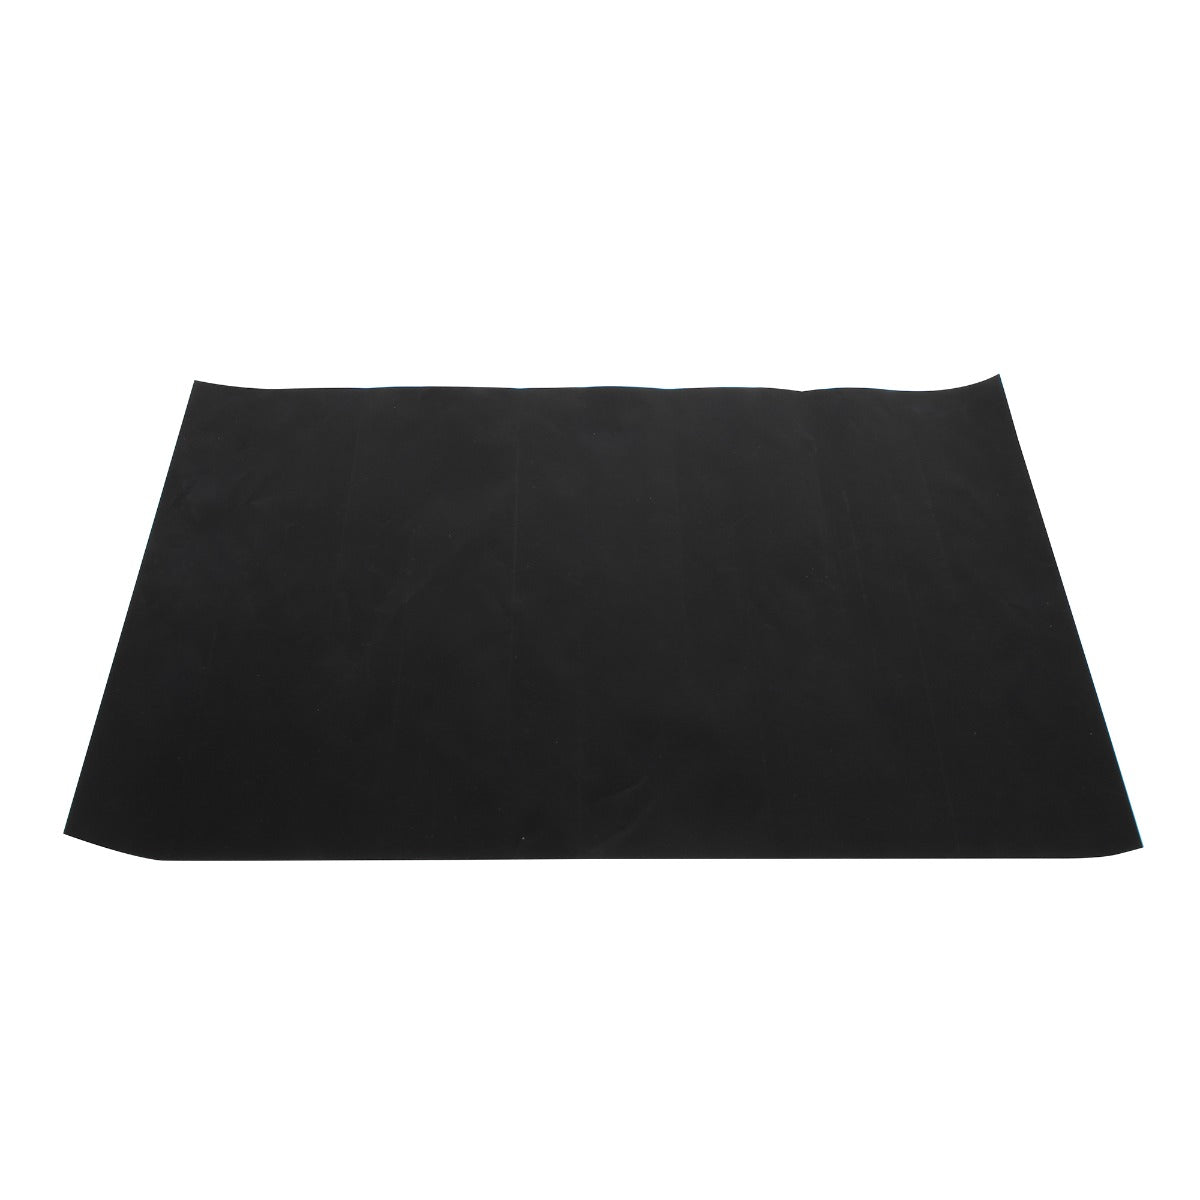 BBQ HOT PLATE LINER